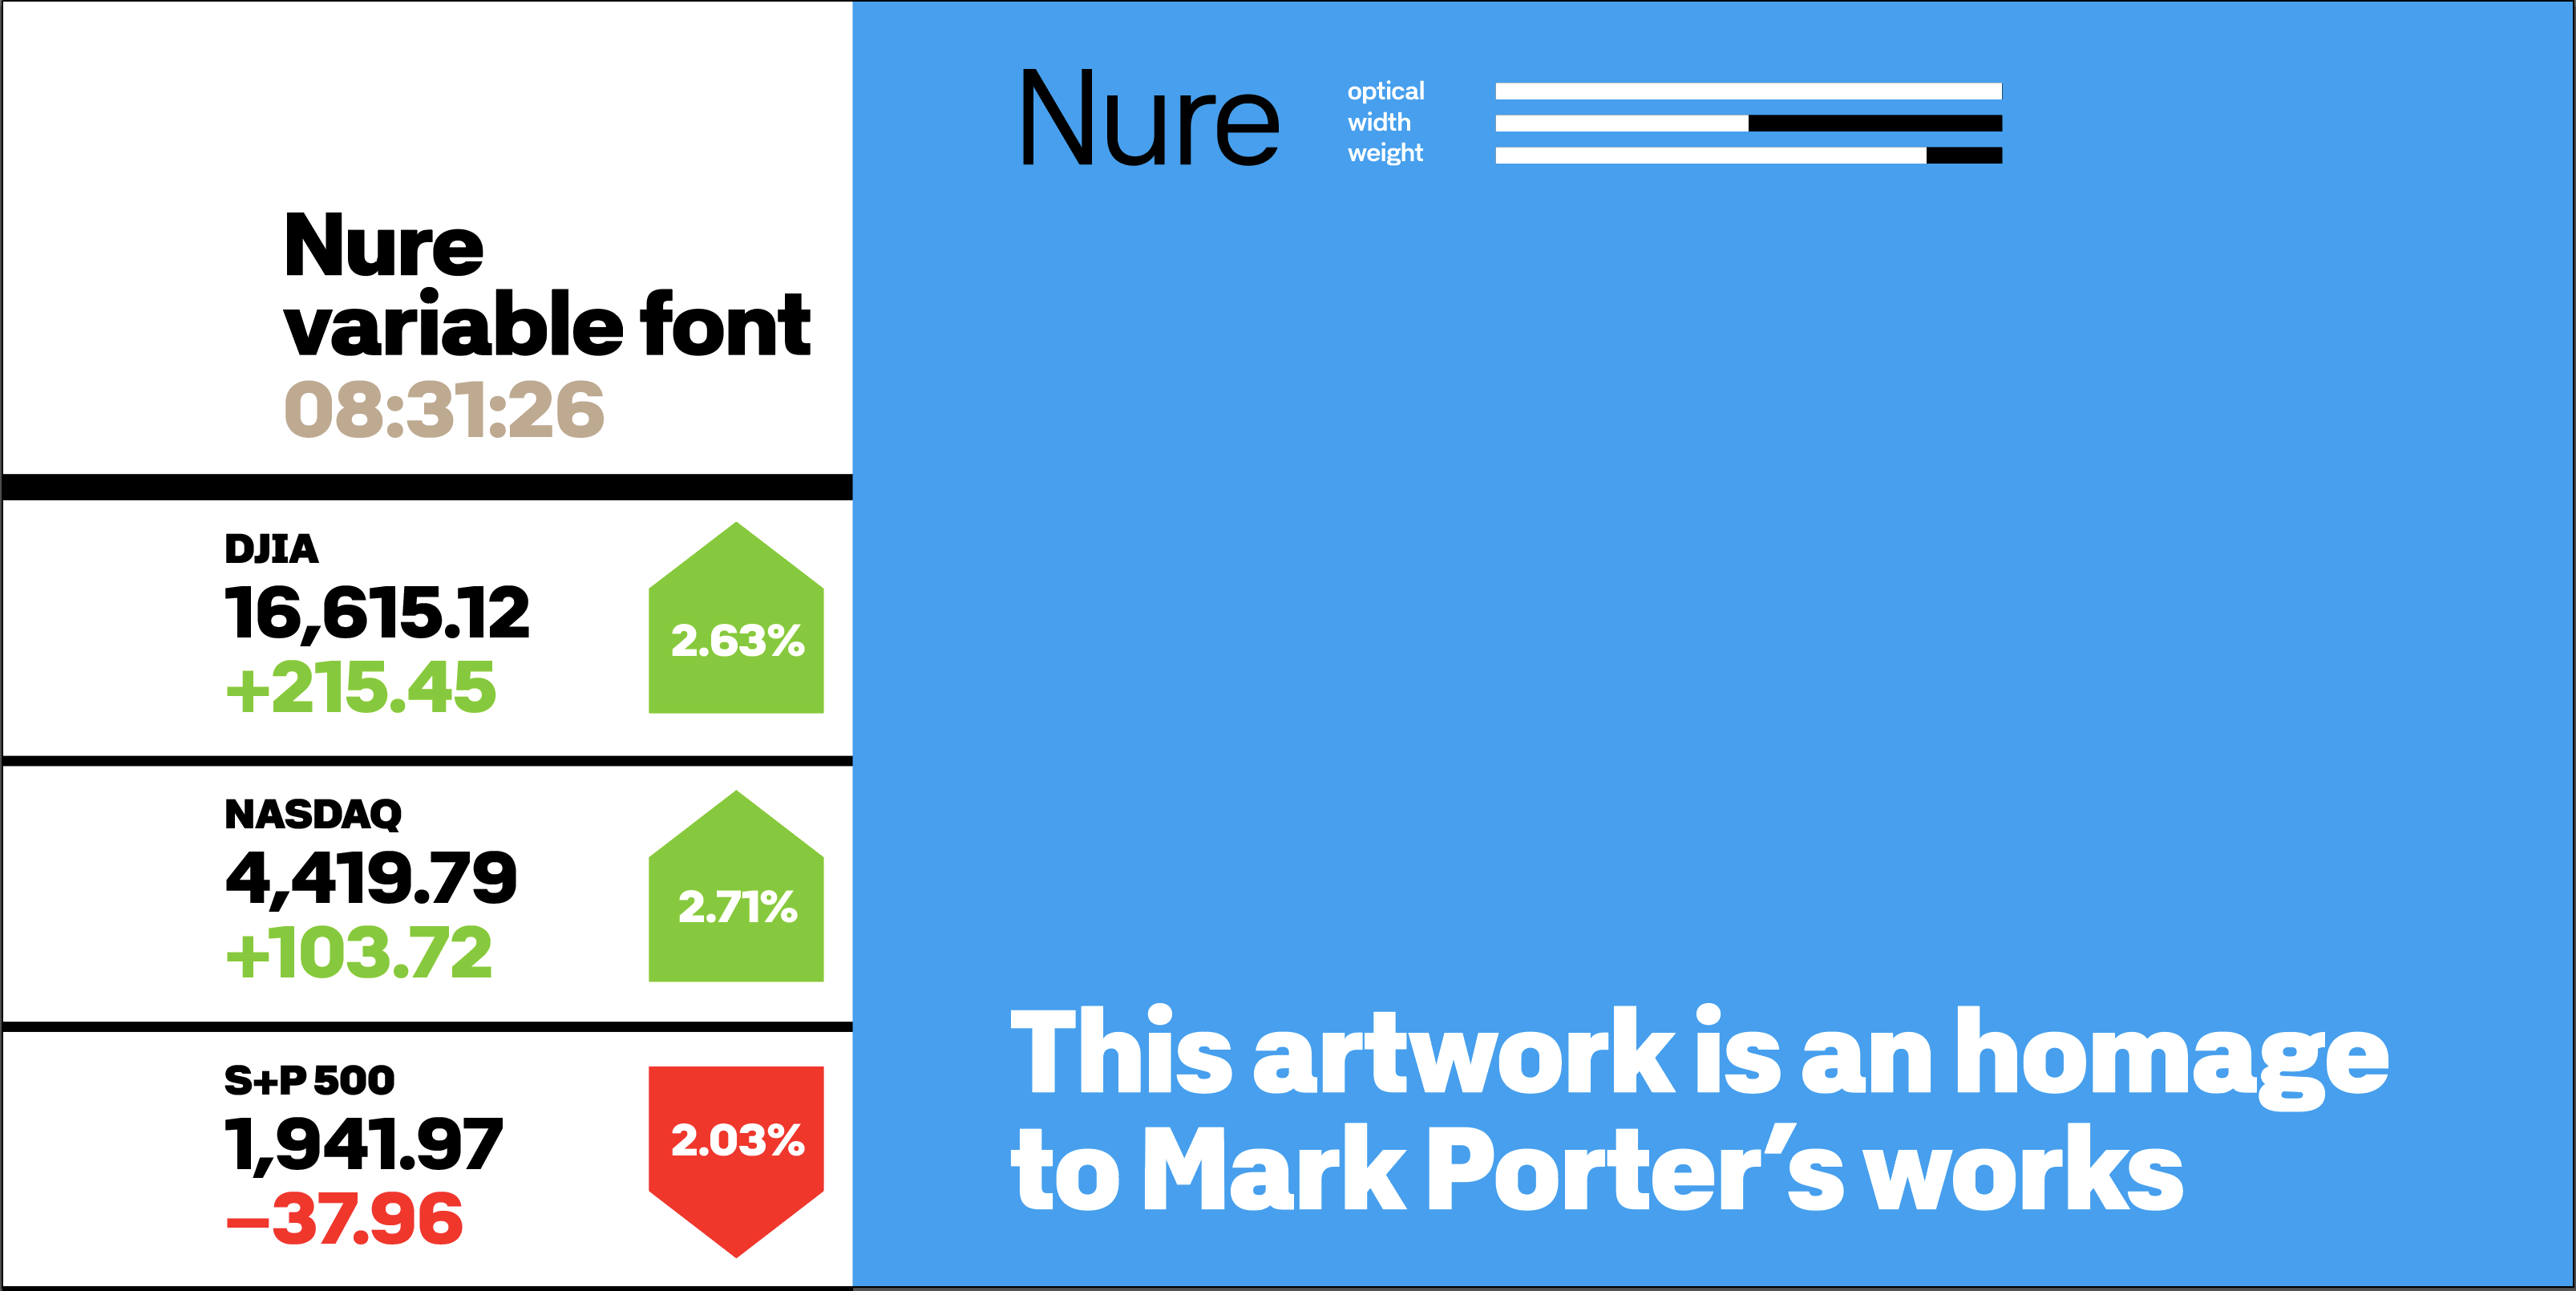 Card displaying Nure Variable typeface in various styles